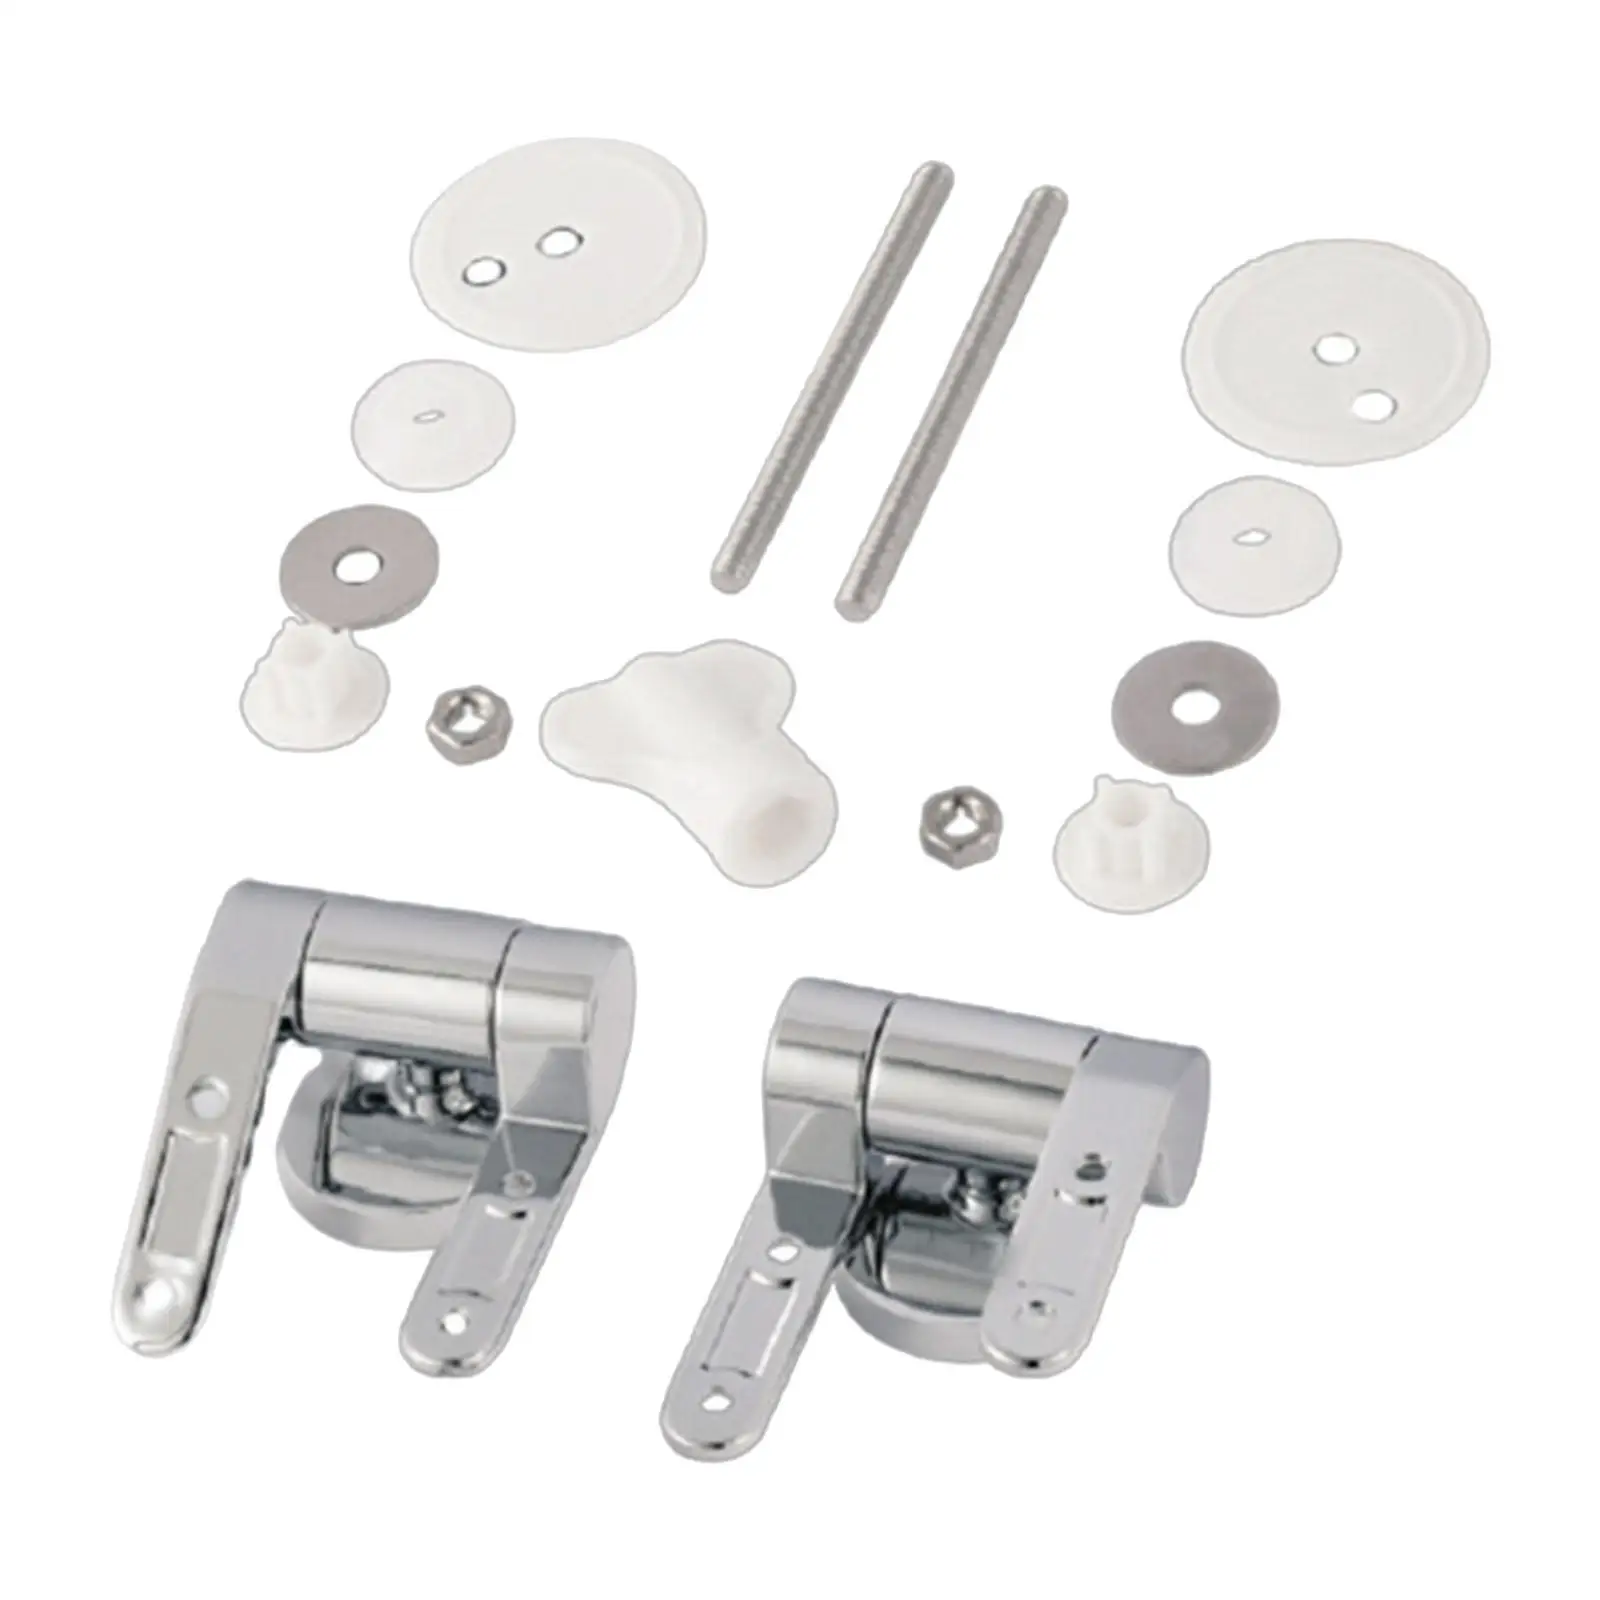 Toilet Seat Hinge Repair Connector Accessories Cover Hinge Fixing Bracket for Kitchen Washing Machine Toilet Lids Flipping Bath